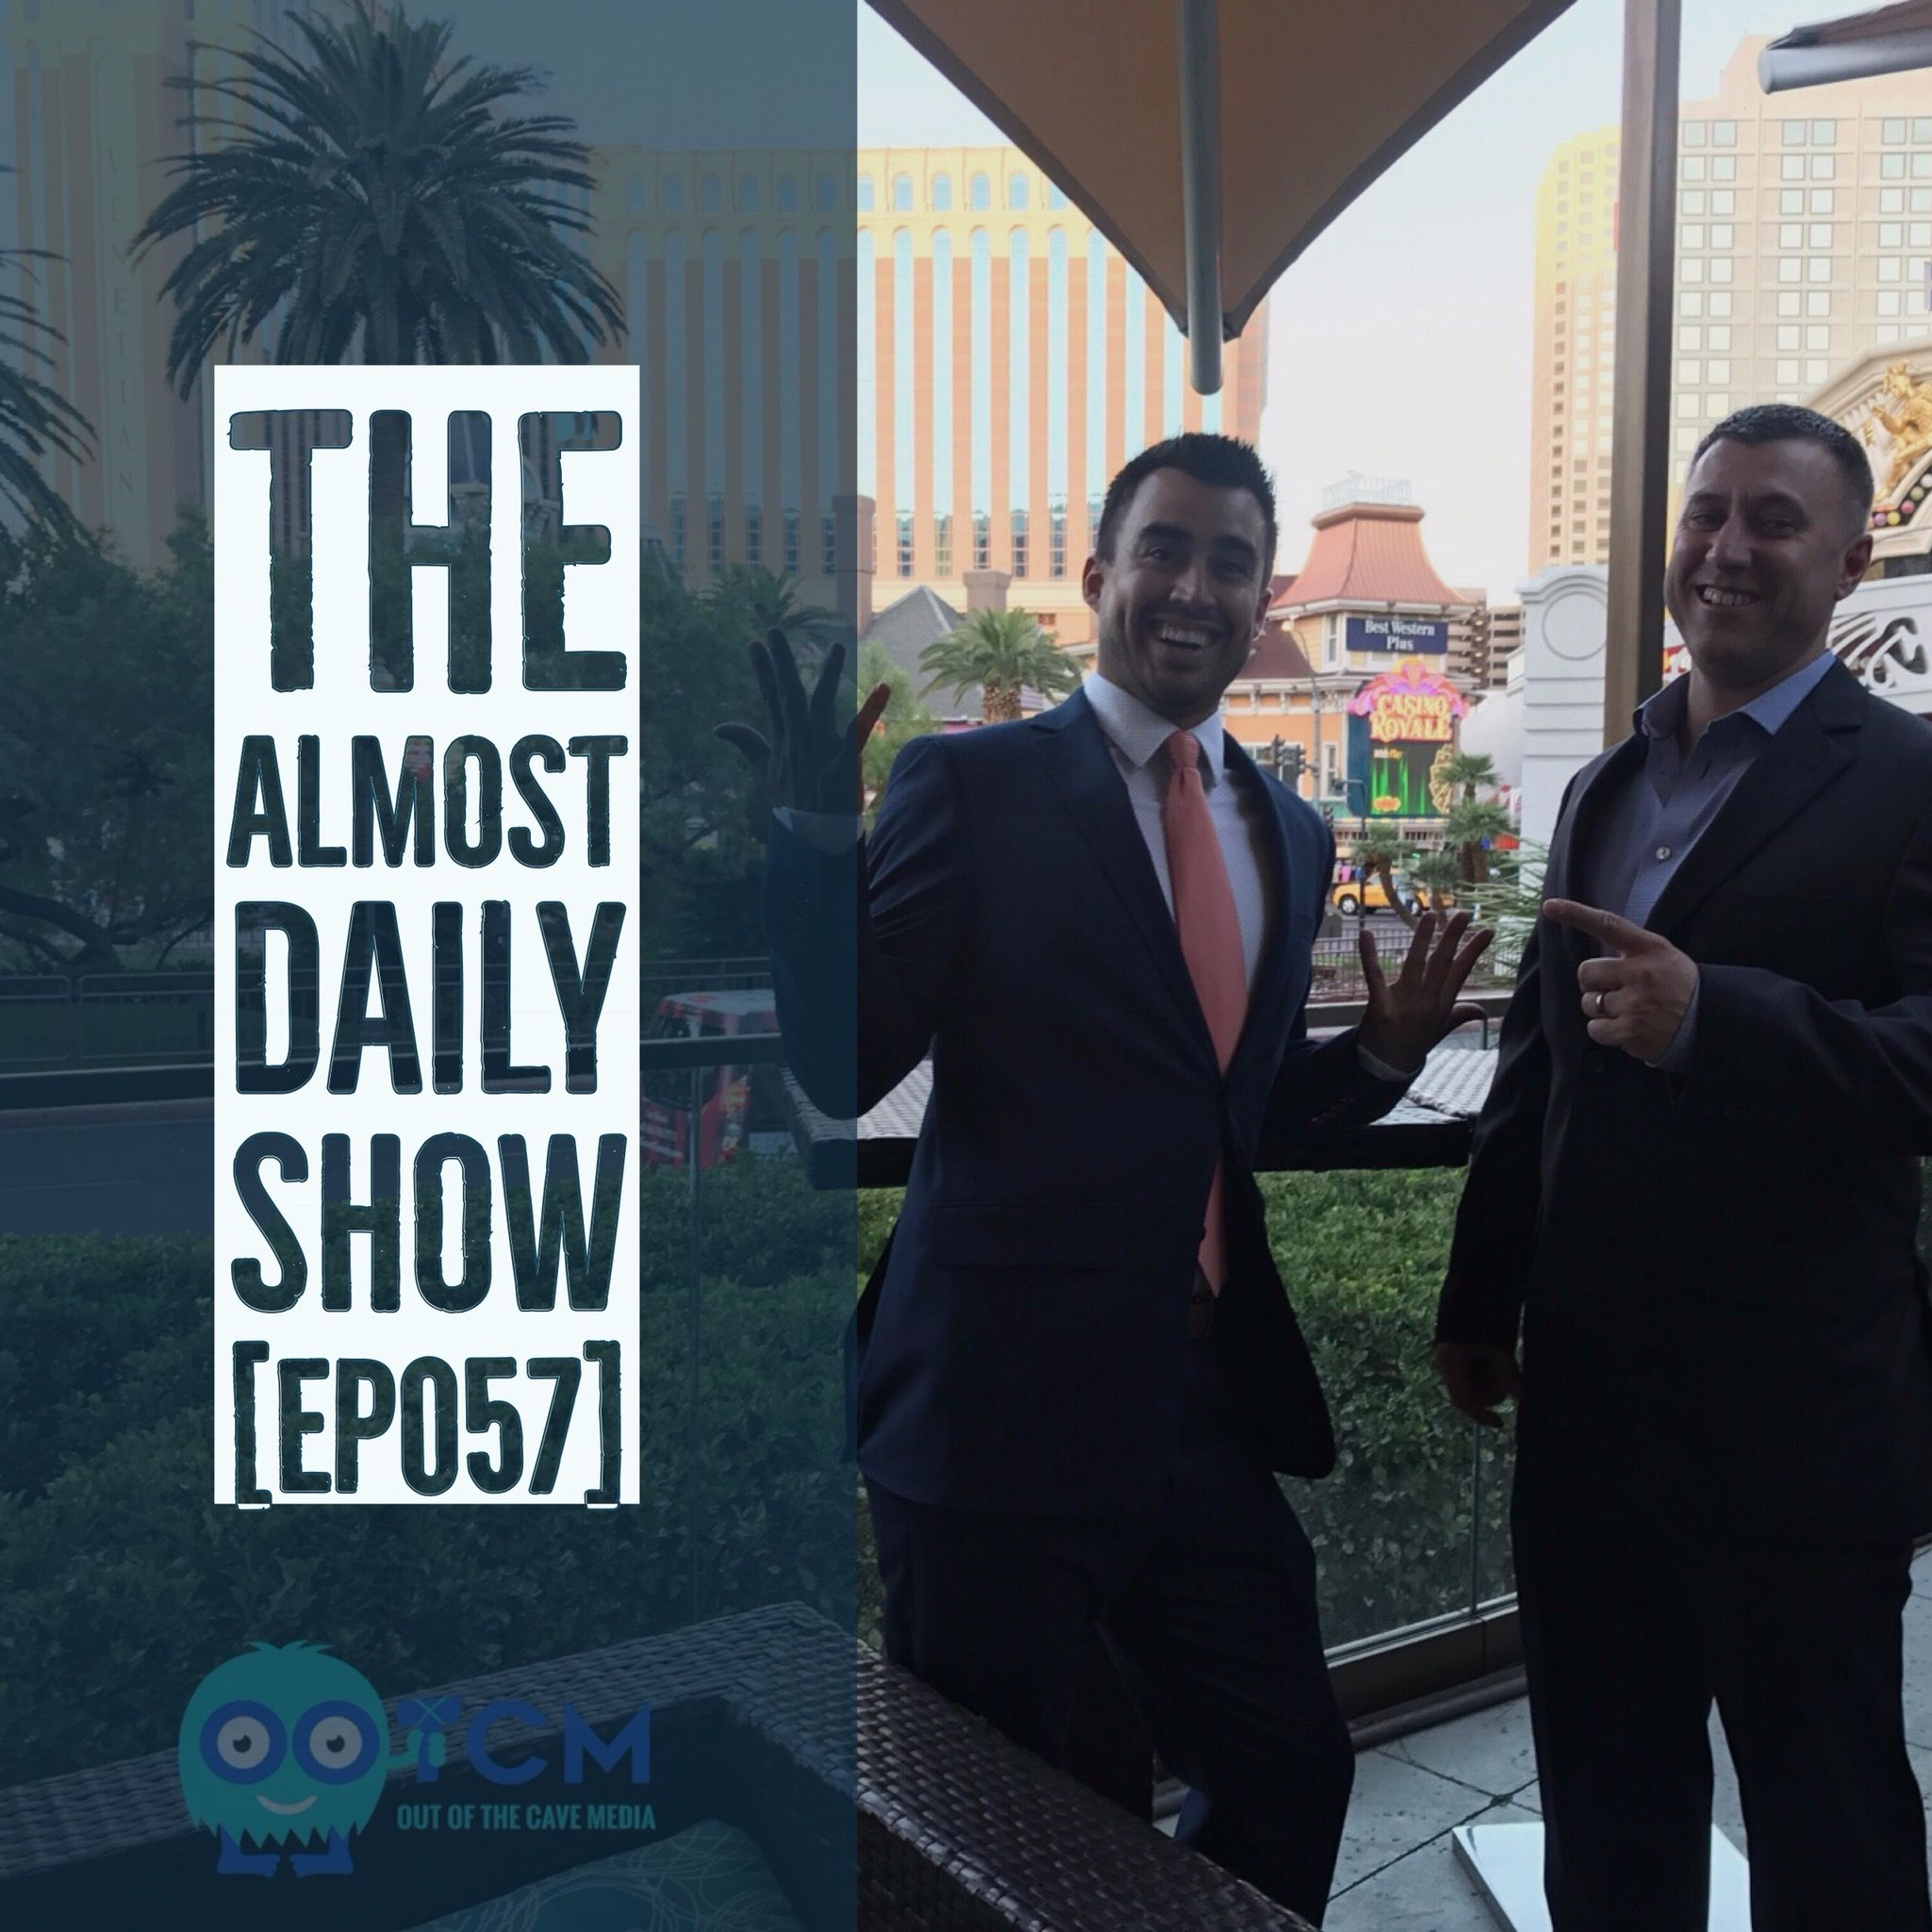 Producing Original Content | The Almost Daily Show Ep 057